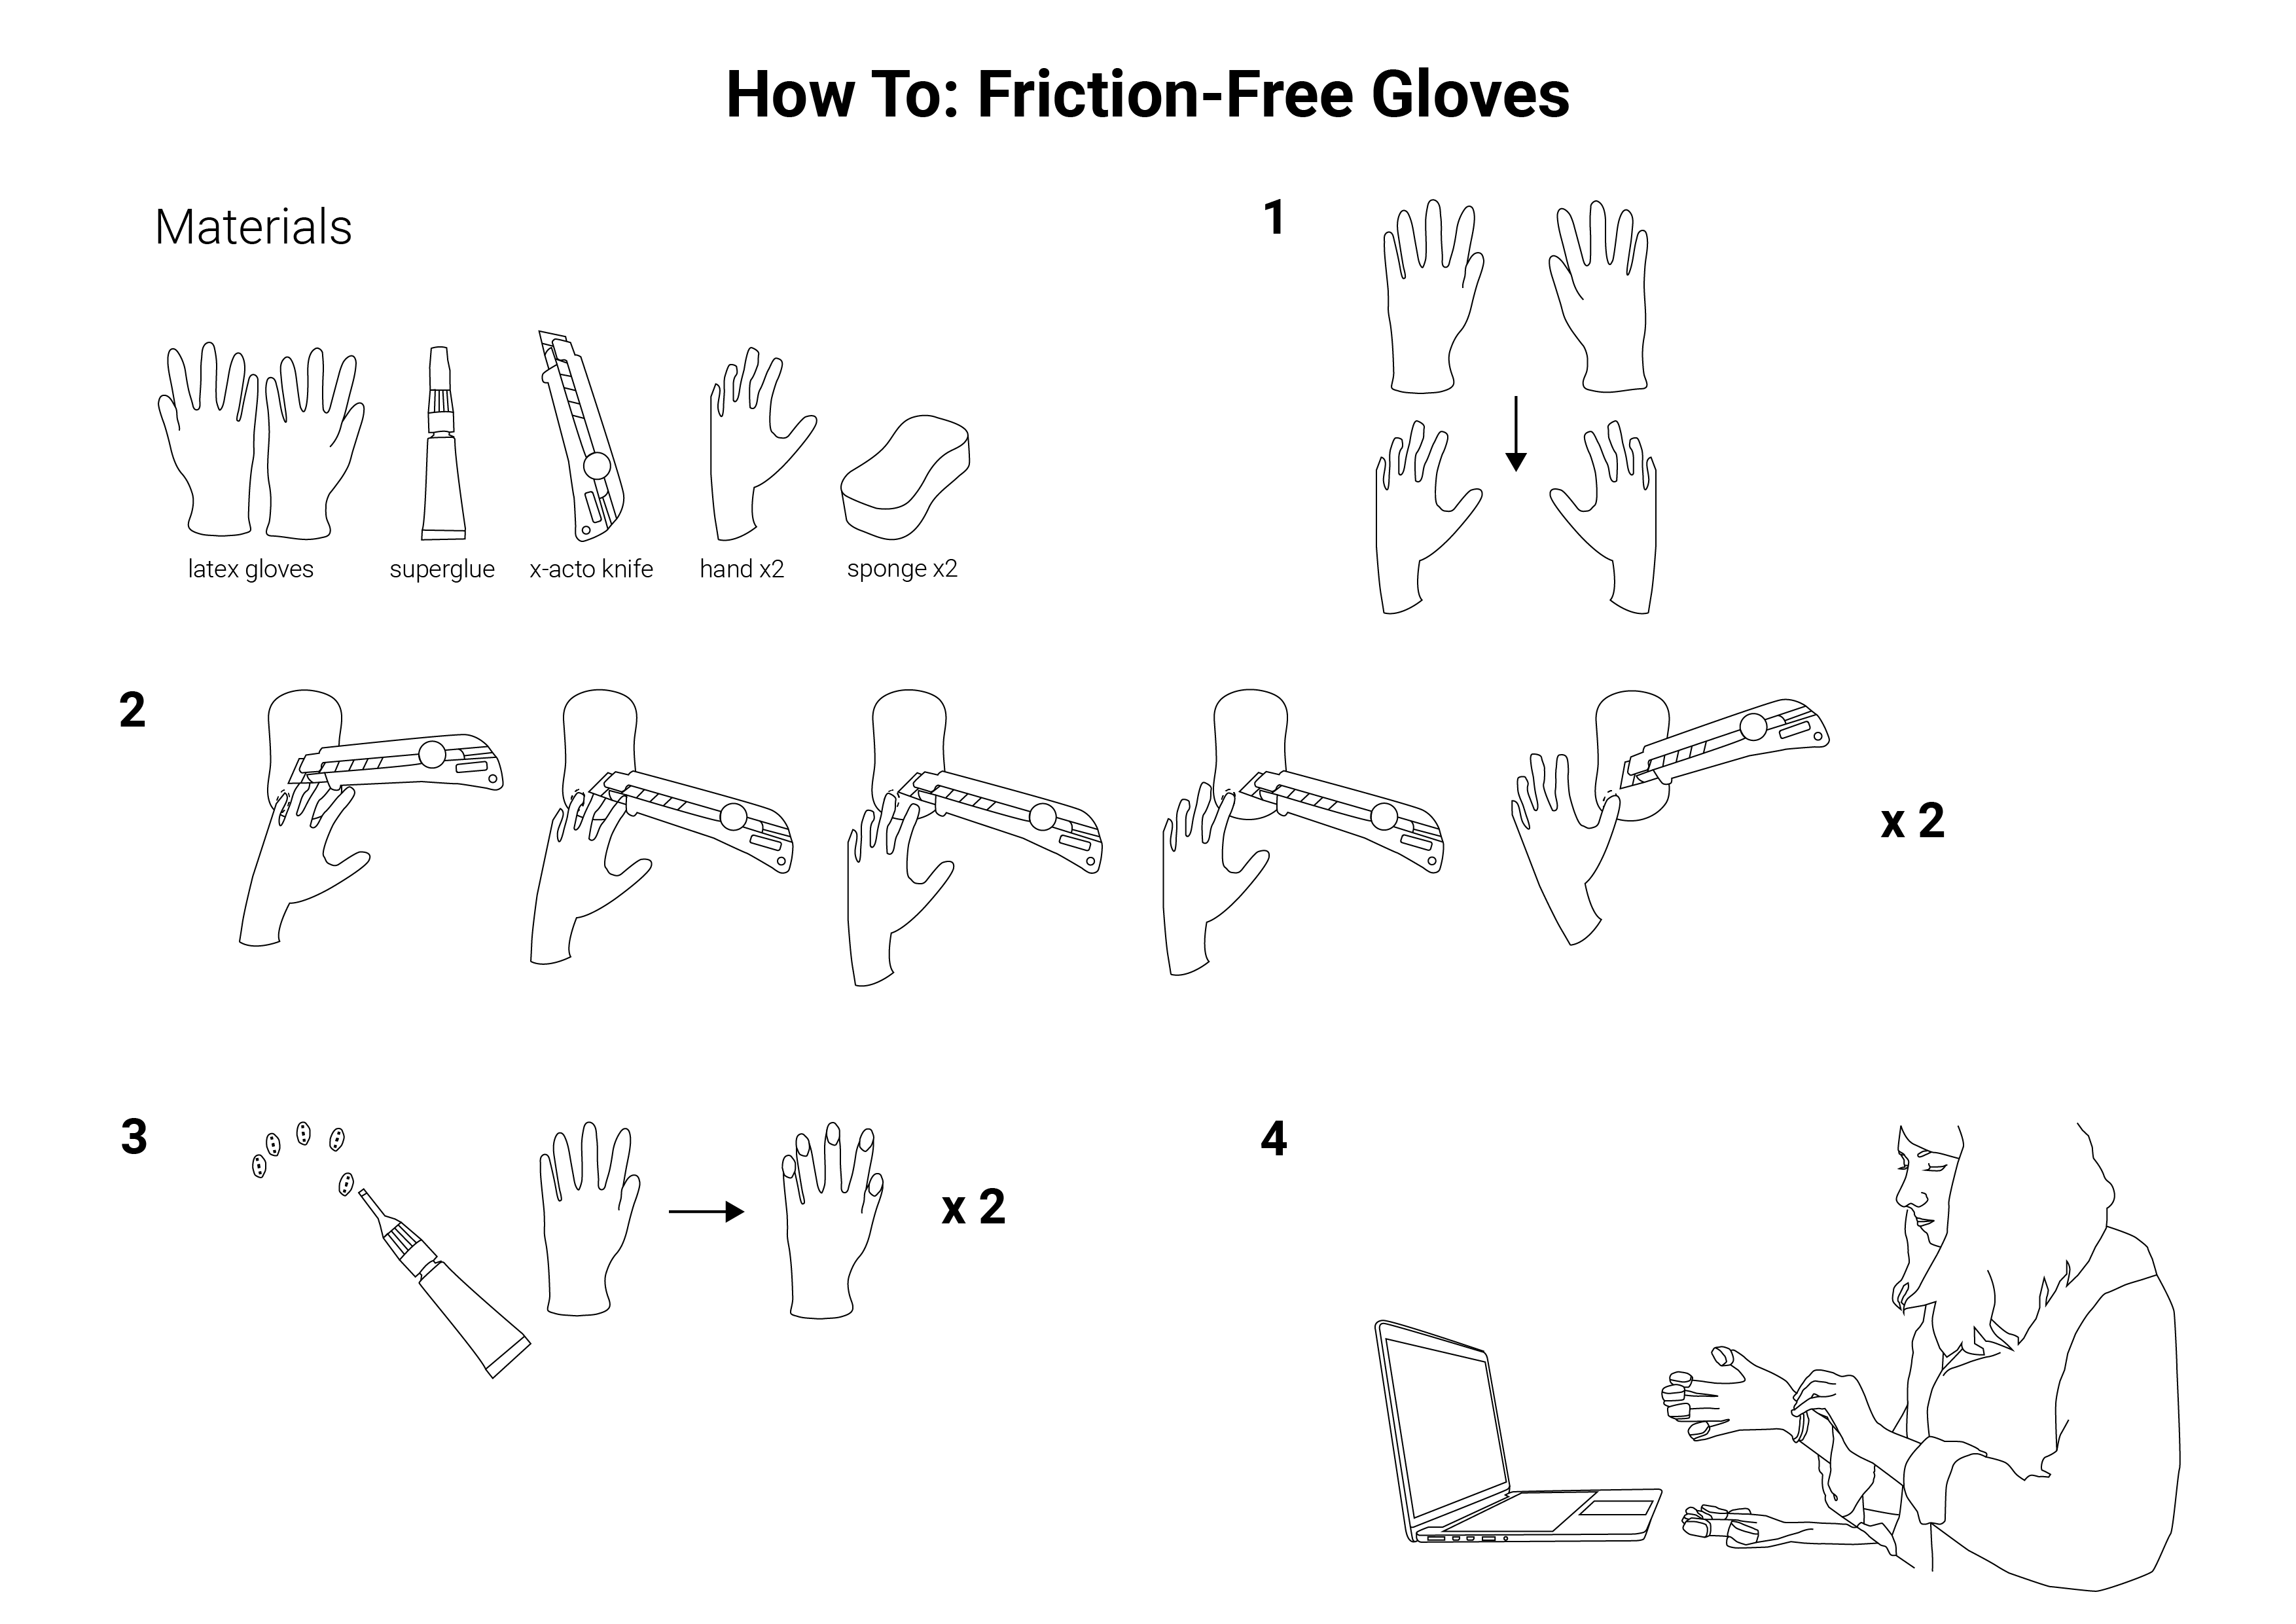 How-to-friction-free-gloves-01.png